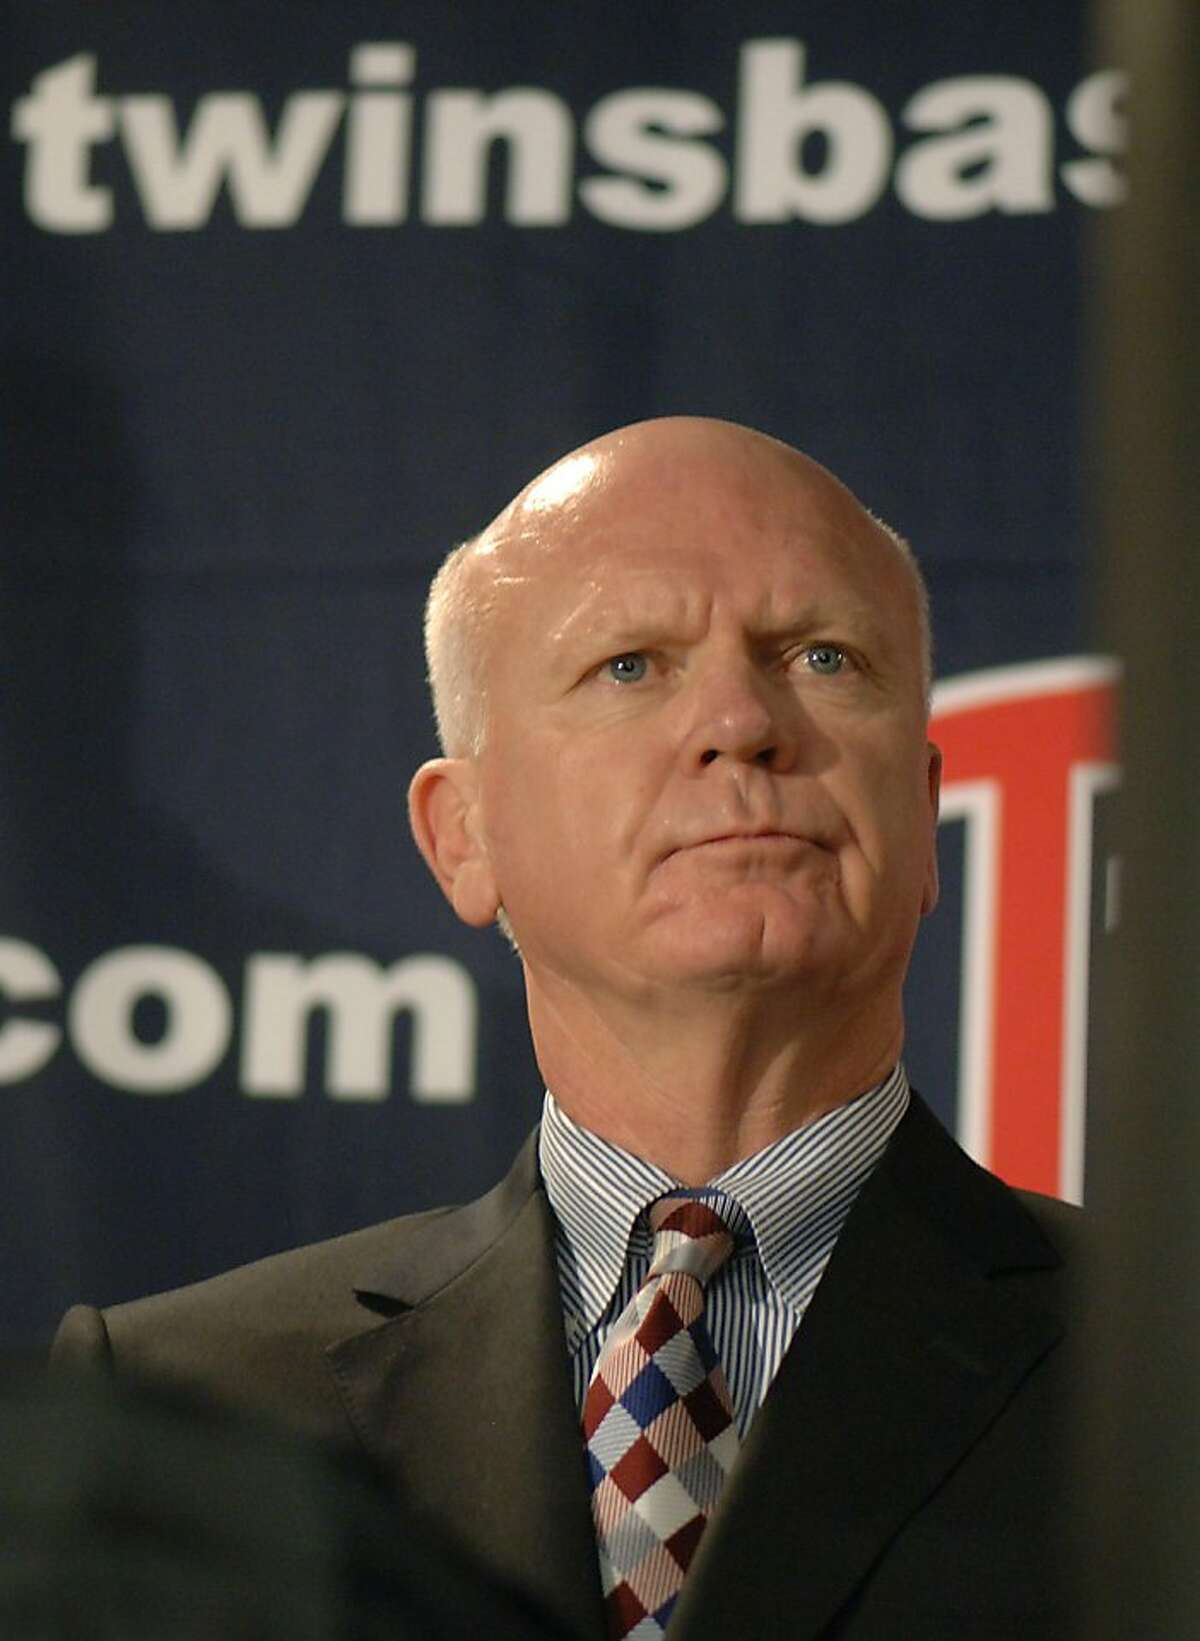 FILE - In this Sept. 13, 2007 file photo, Minnesota Twins general manager Terry Ryan announces his resignation during a news conference in Minneapolis. The Twins have fired general manager Bill Smith and returned Terry Ryan to the role on an interim basis. The change was announced Monday, Nov. 7, 2011. (AP Photo/Janet Hostetter, File) Ran on: 11-08-2011 Former Minnesota general manager Terry Ryan is returning to the position on an interim basis. Ran on: 11-08-2011 Former Minnesota general manager Terry Ryan is returning to the position on an interim basis.